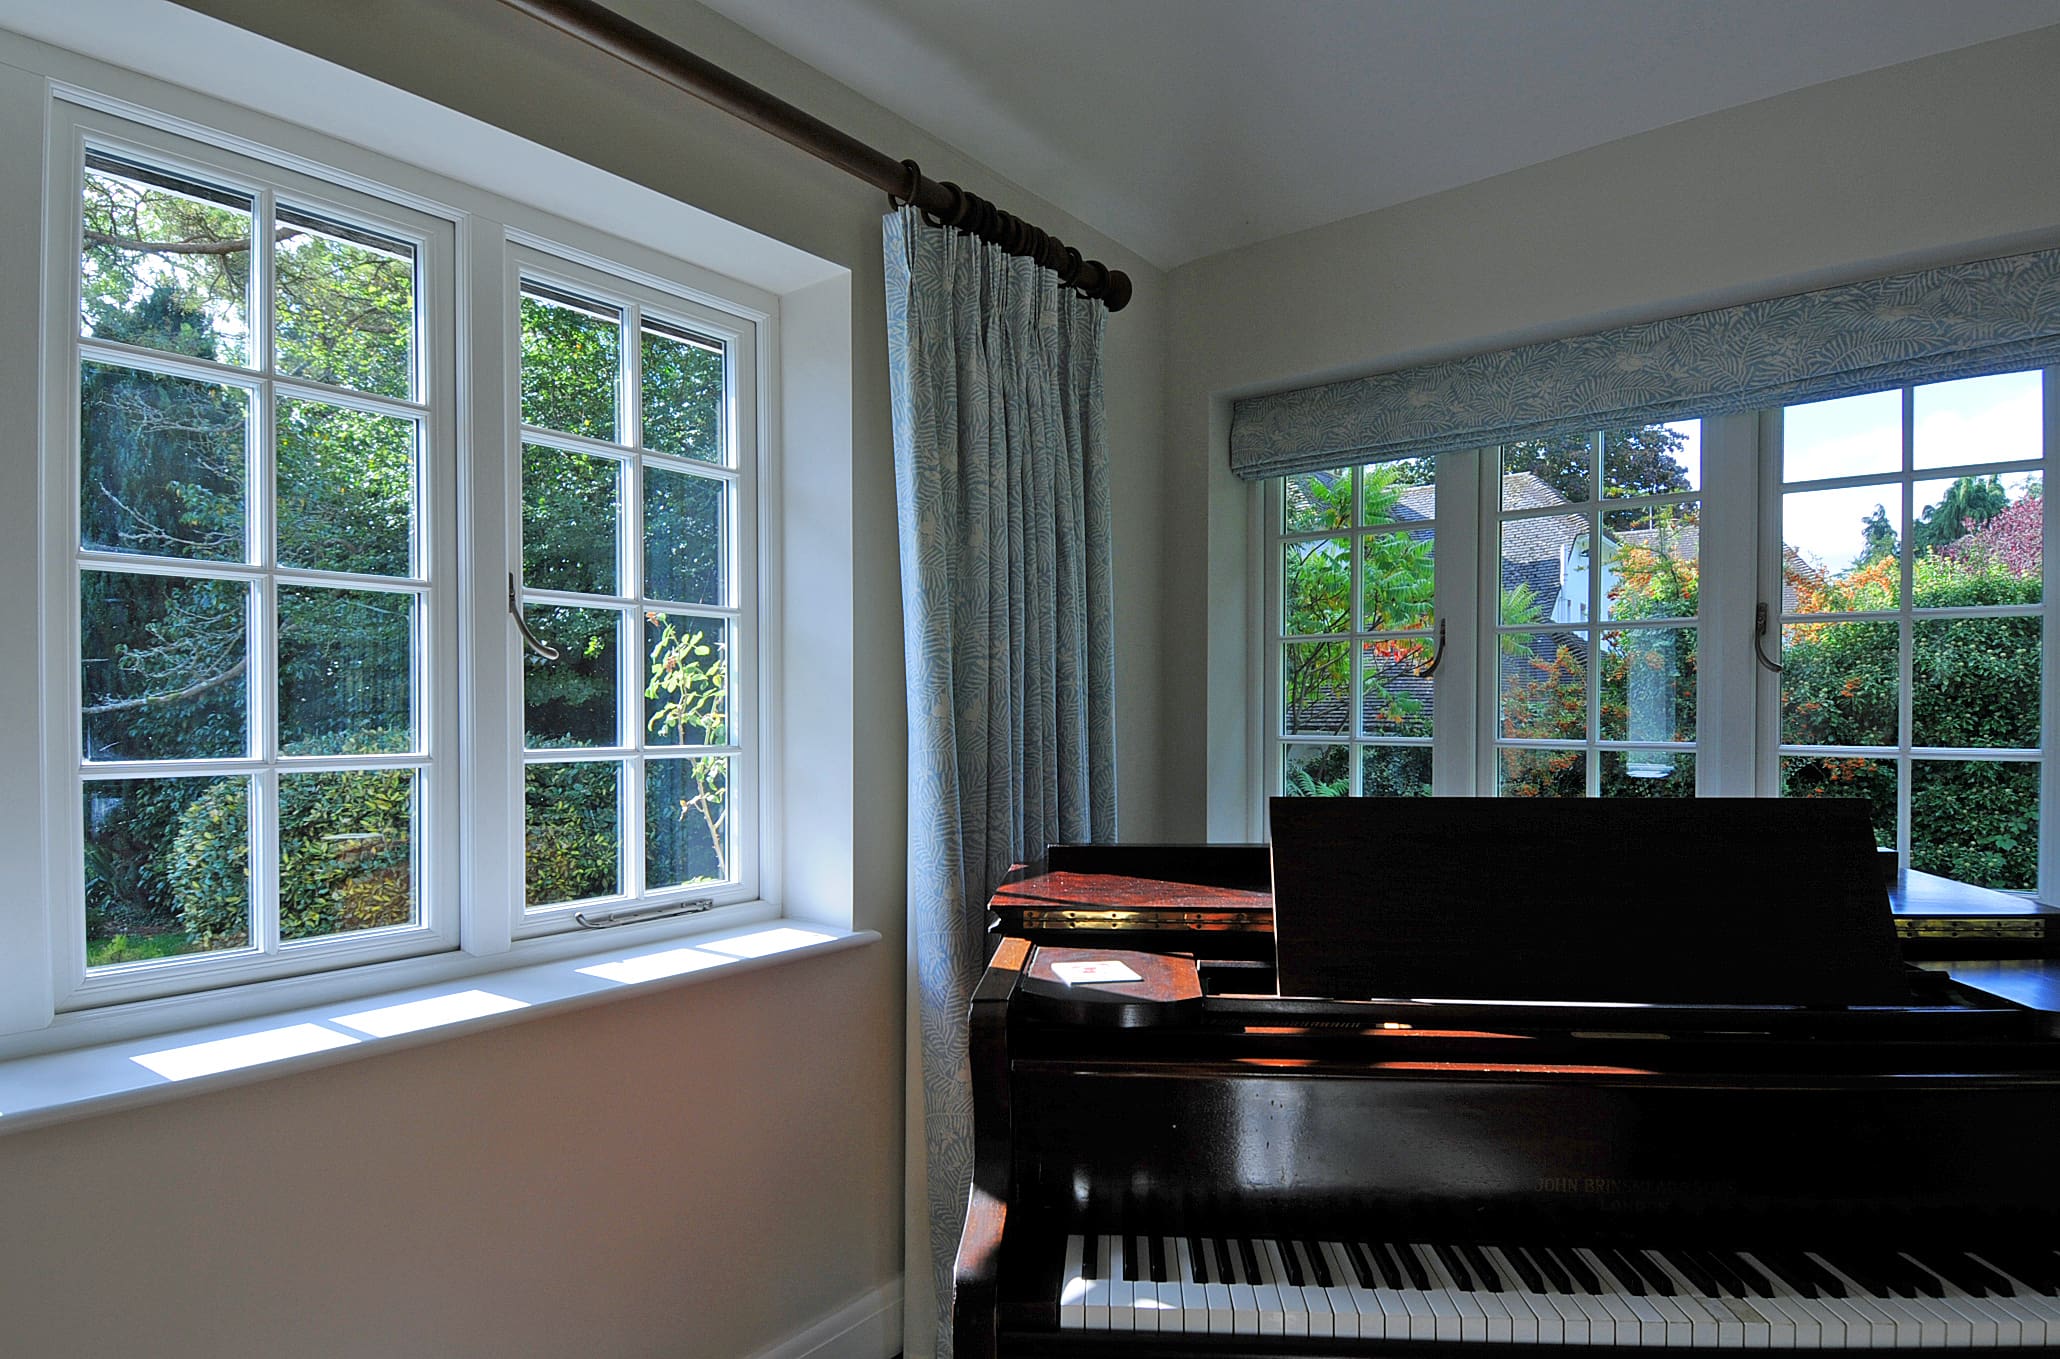 Traditional home with piano and windows.